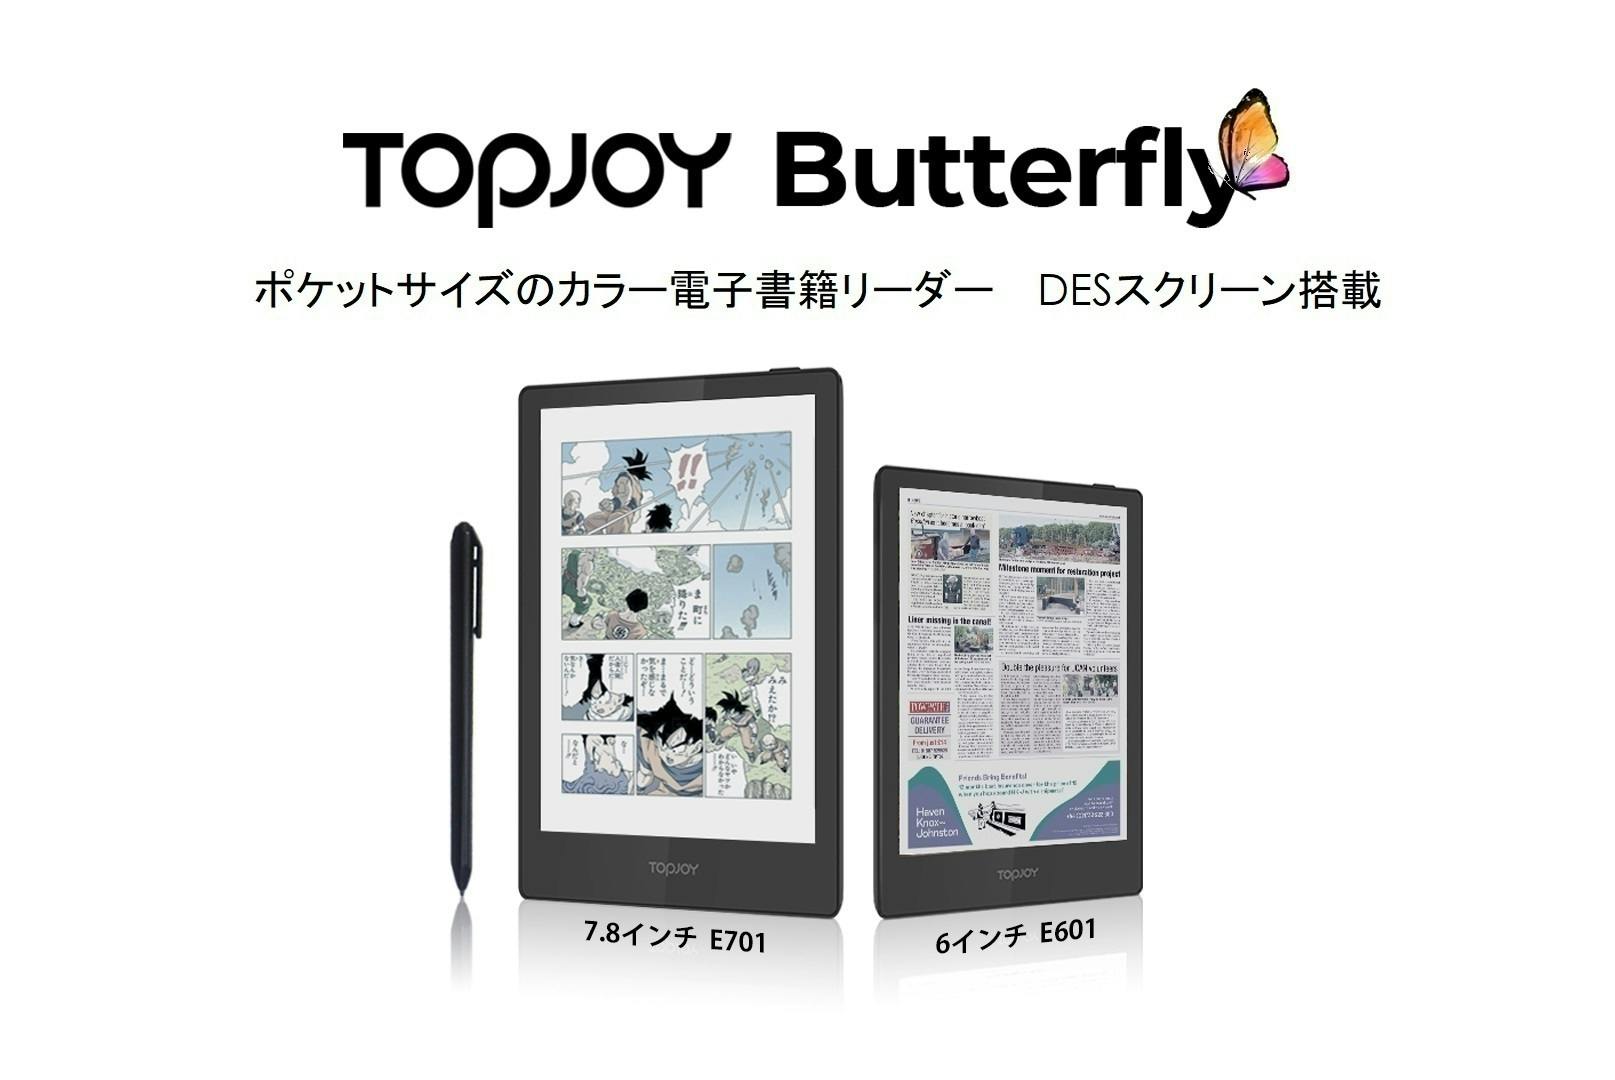 TopJoy Butterflyポケットサイズのカラー電子書籍リーダー日本初公開 